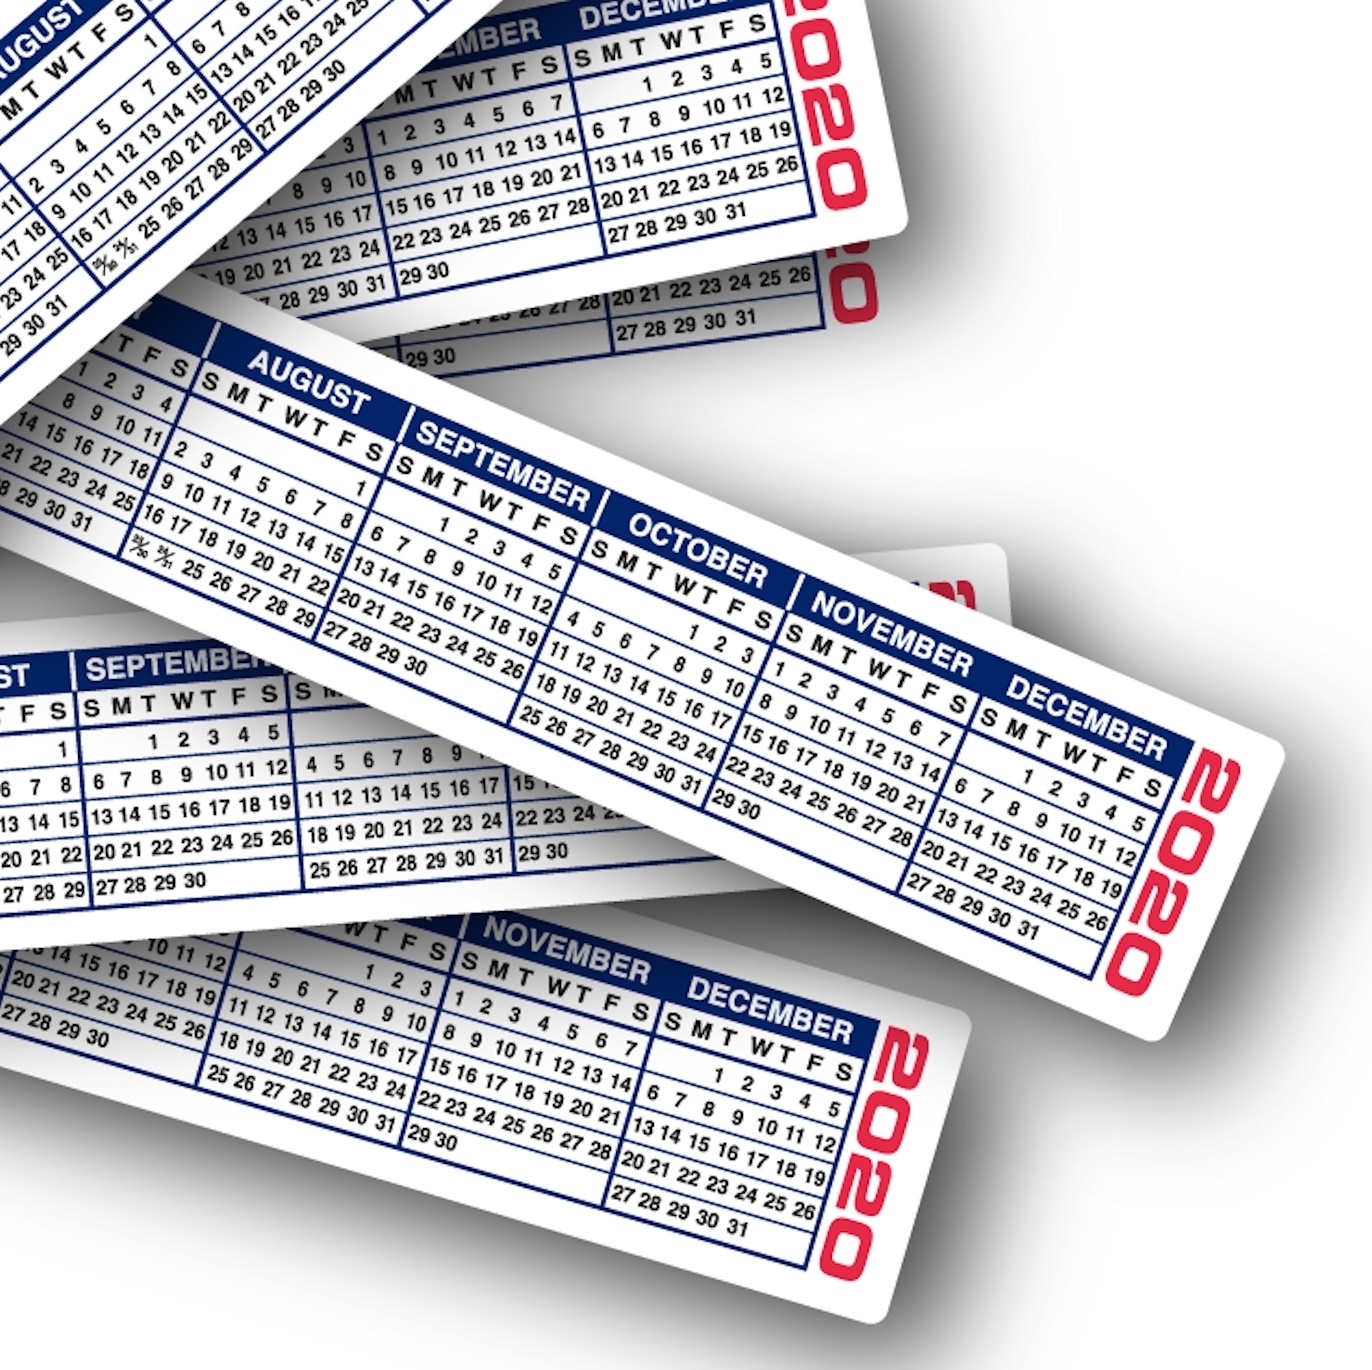 2021 Keyboard Calendar Strips 2021 Keyboard Calendar Strips Index Of Images Misc 2021